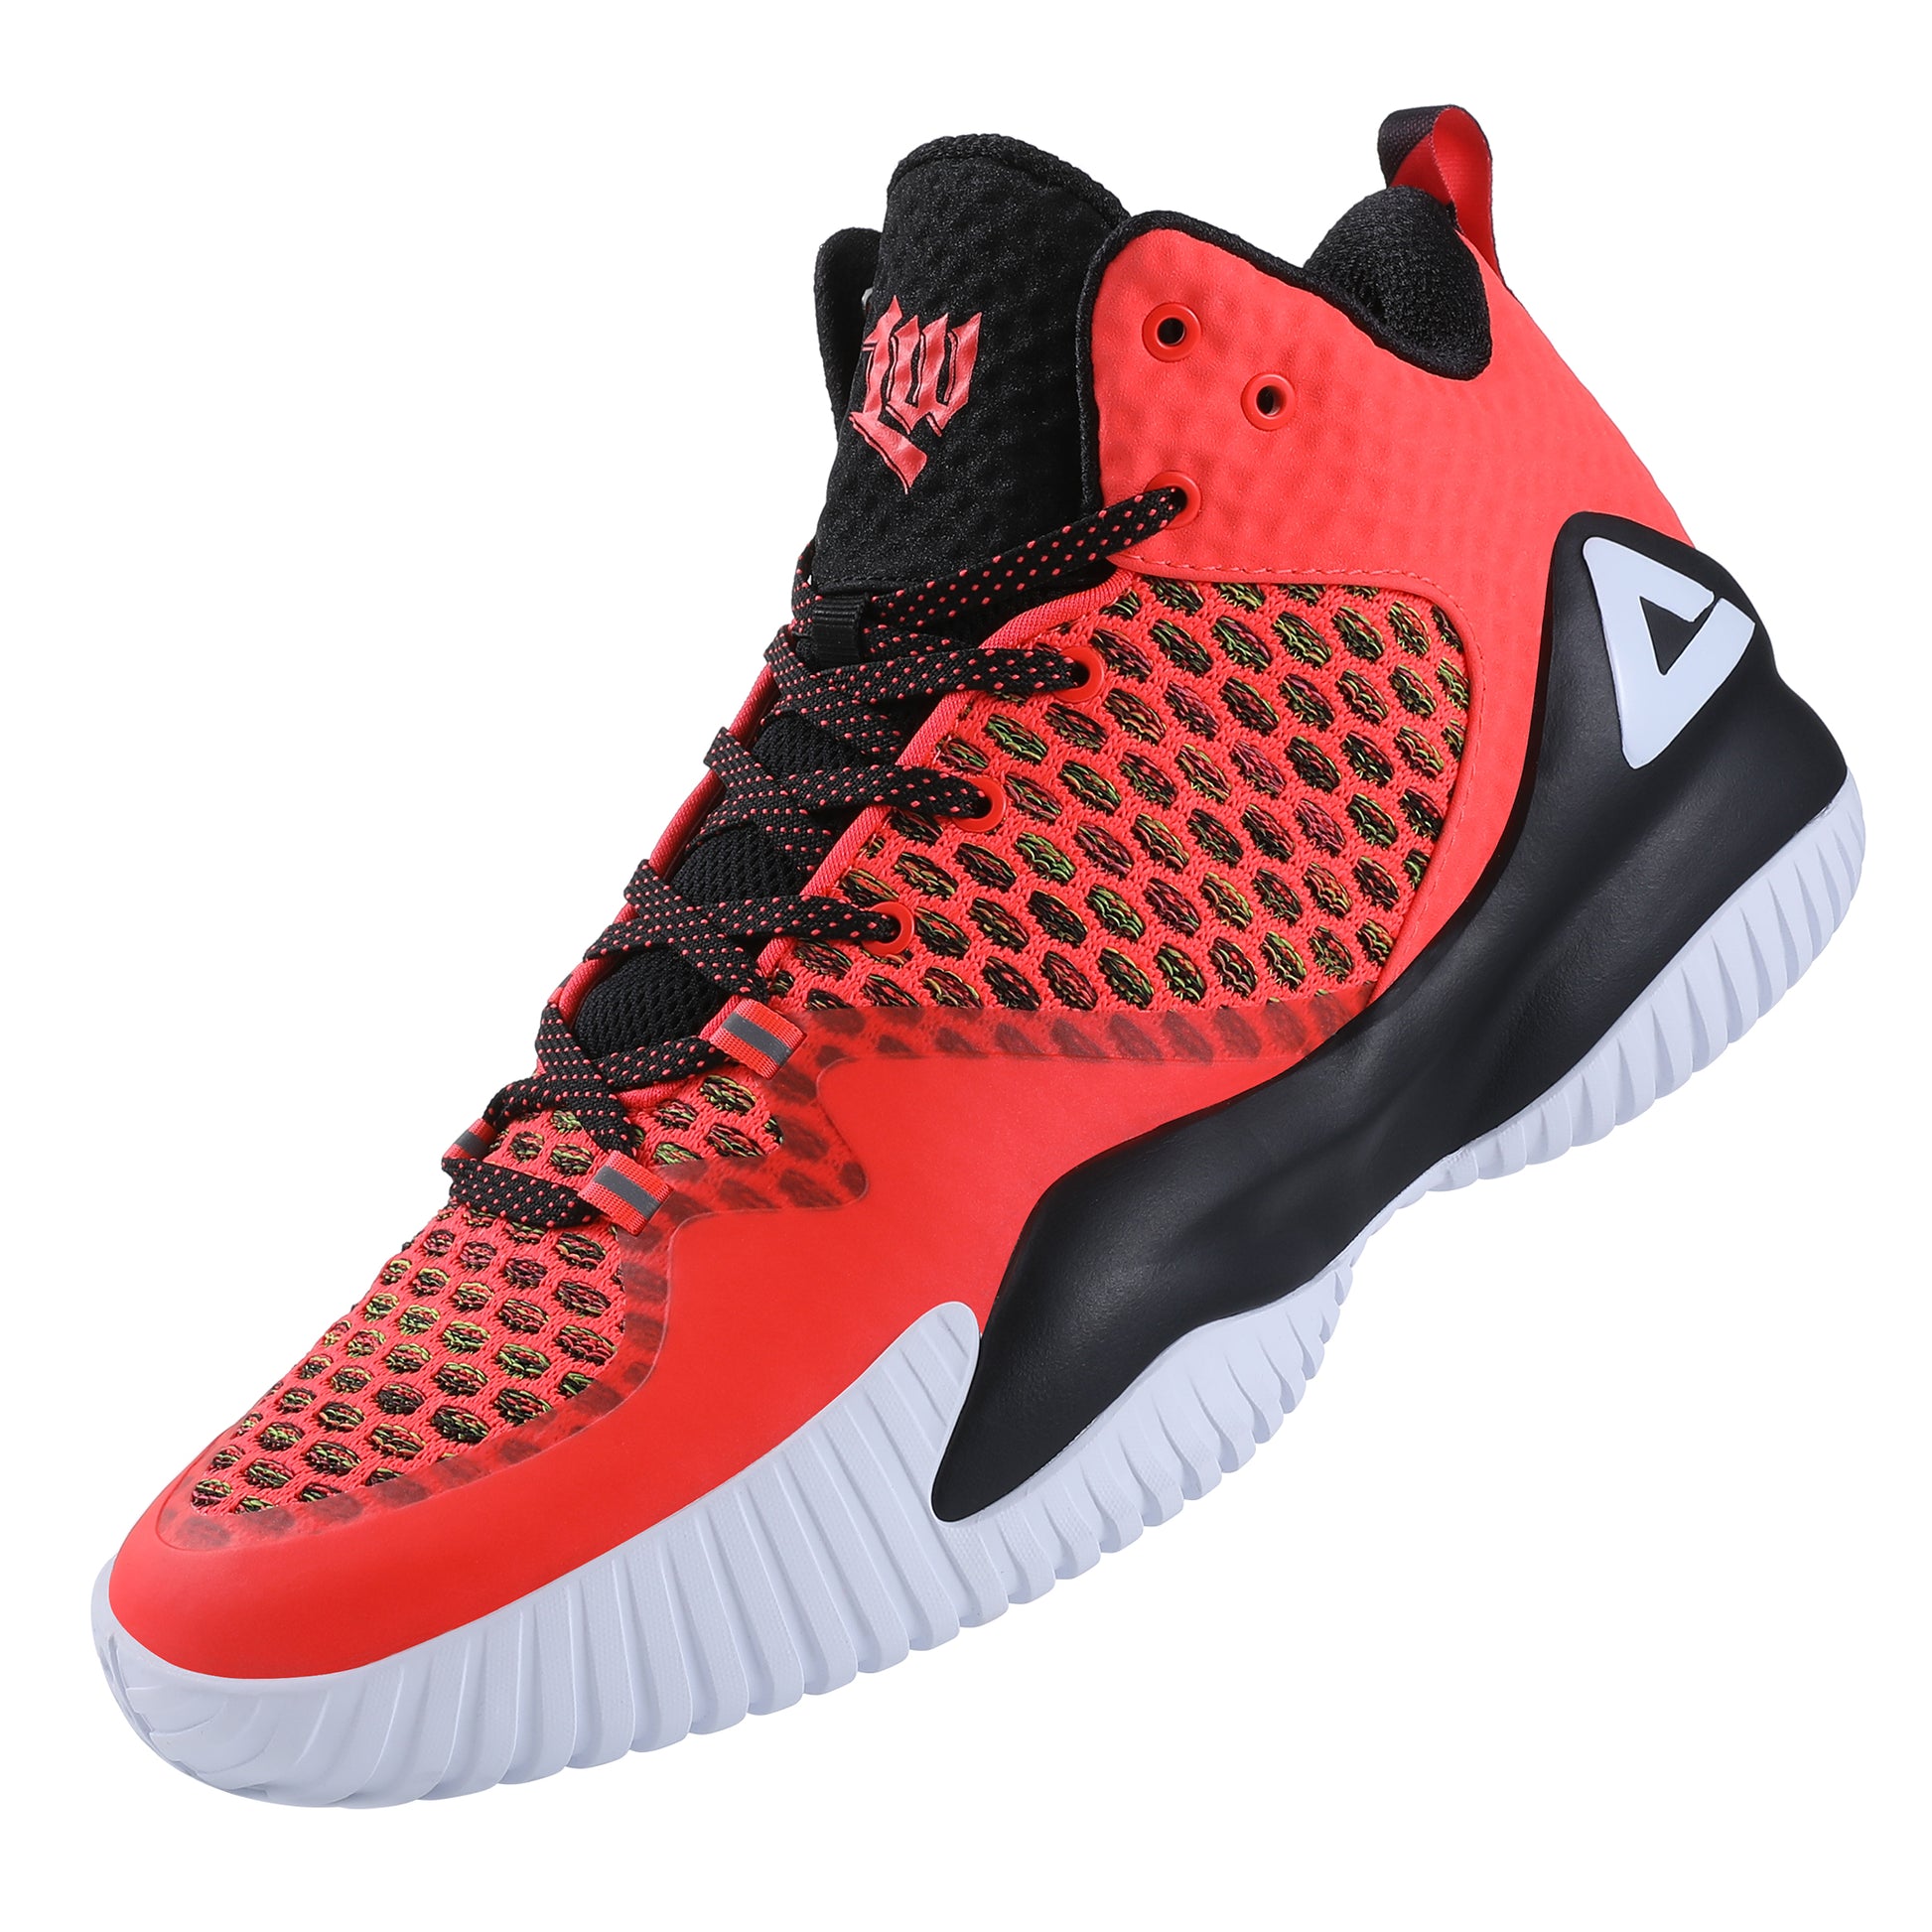 Surreal and heavy detailed ball space basketball shoes product p